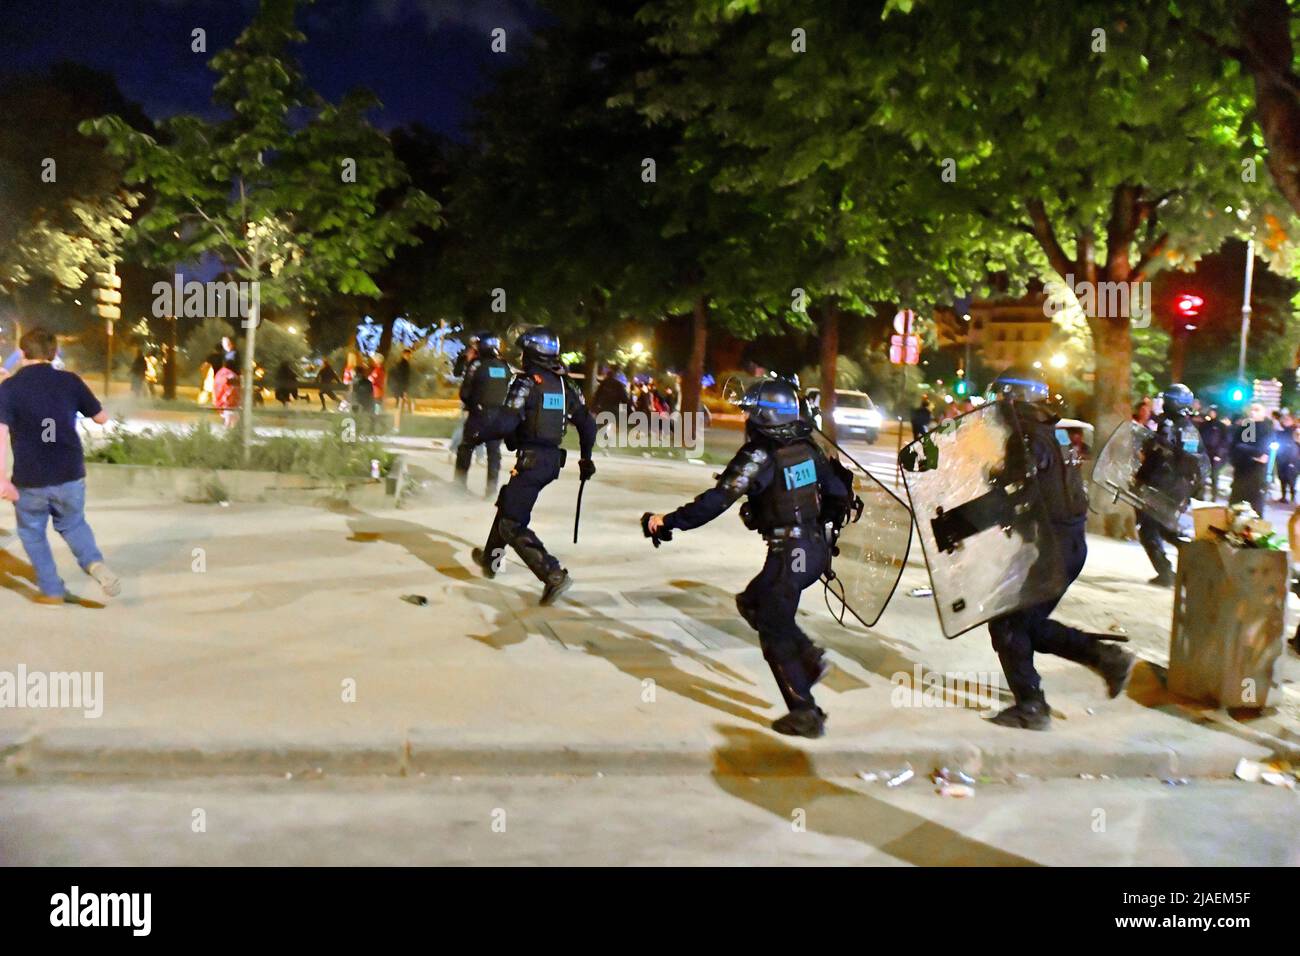 Football fans clash with police near Place de la Nation in Paris, France on May 28, 2022, after the Champions League football match final between Liverpool FC and Real Madrid. Photo by Karim Ait Adjedjou/ABACAPRESS.COM Stock Photo